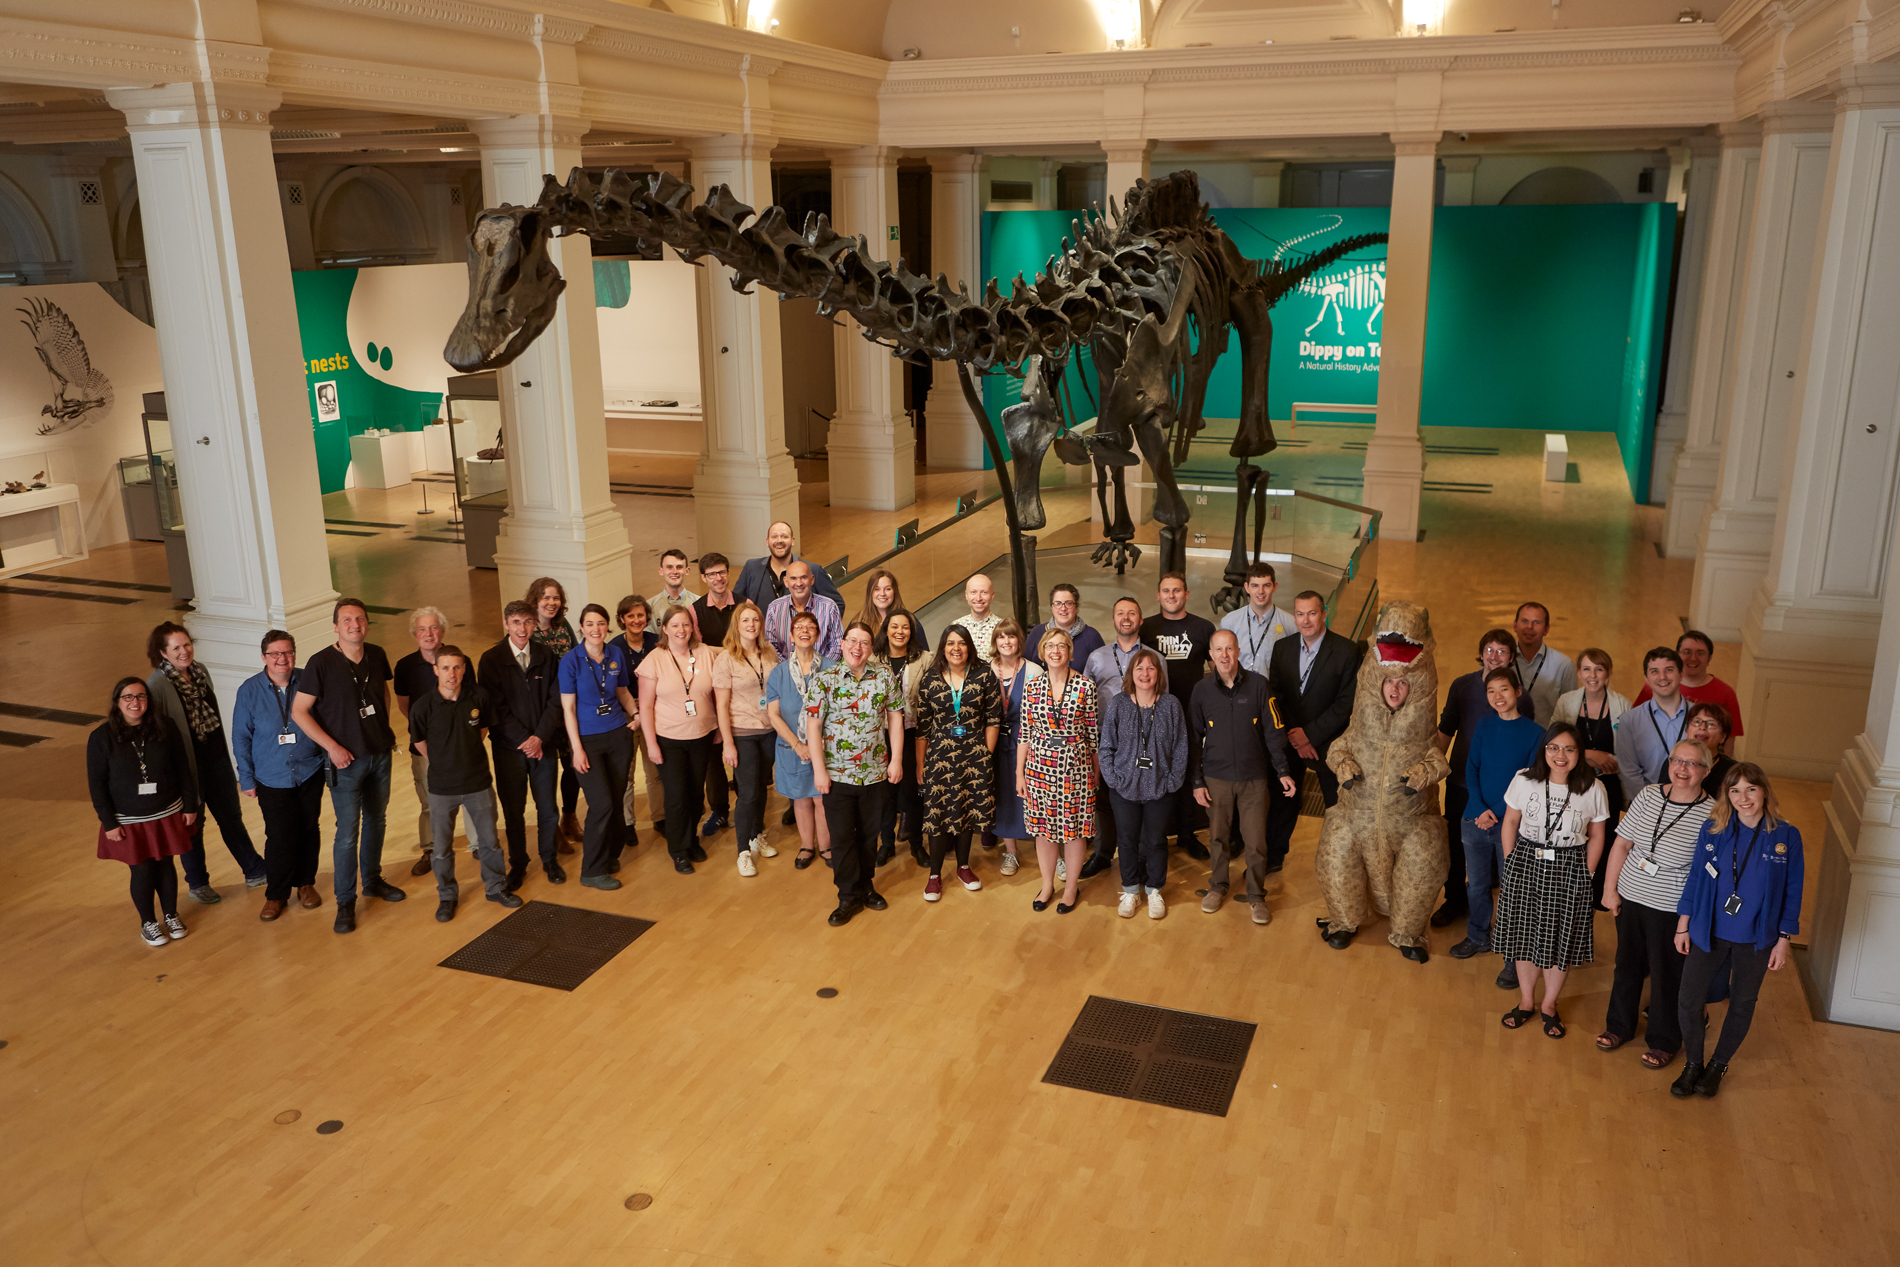 Birmingham Museums Trust joins Coventry & Warwickshire Chamber of Commerce after successful summer